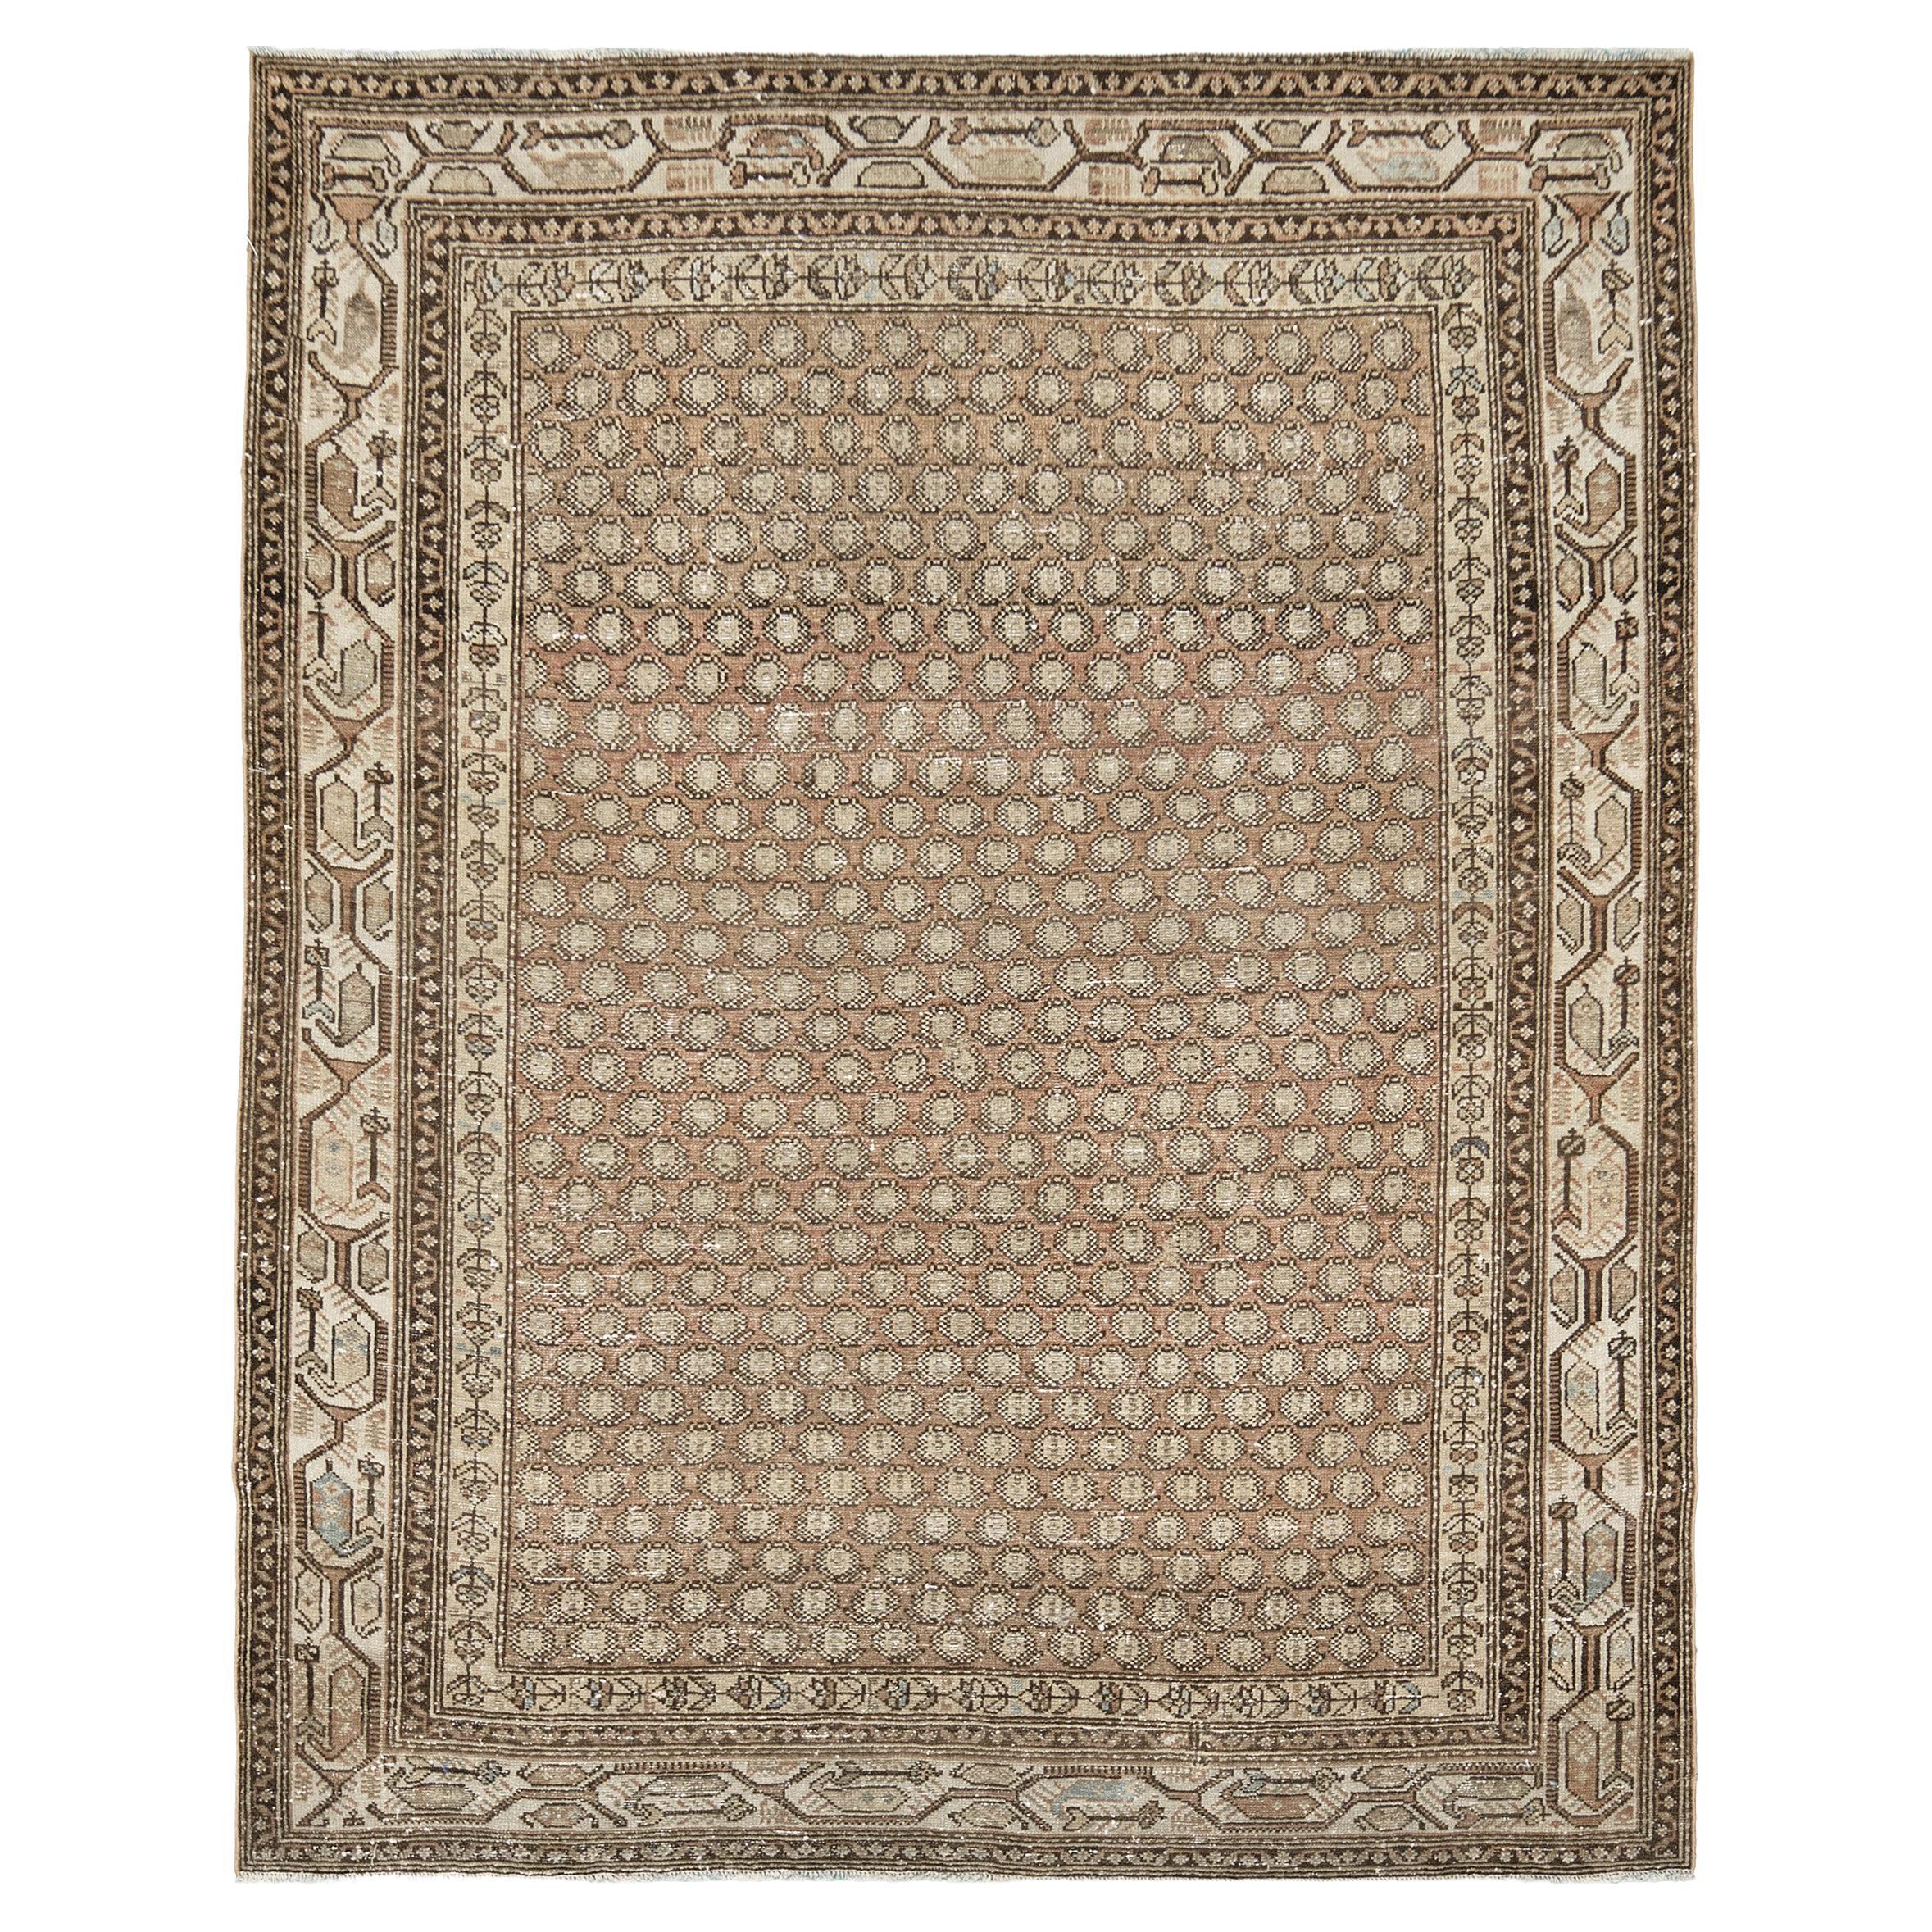 Antique Persian Malayer by Mehraban Rugs